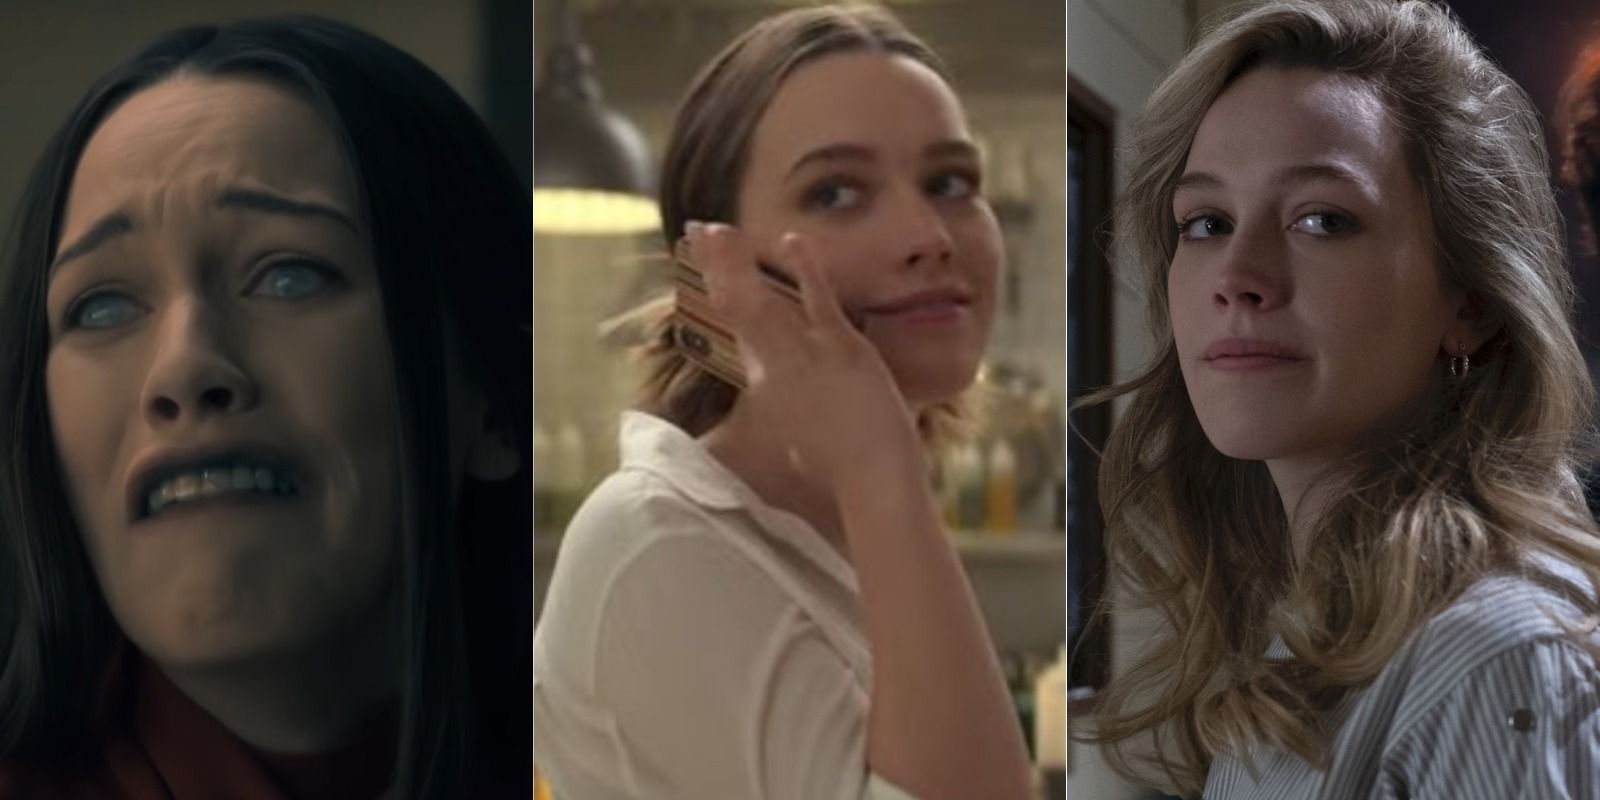 Victoria Pedretti in The Haunting of Hill House, YOU, and Bly Manor.